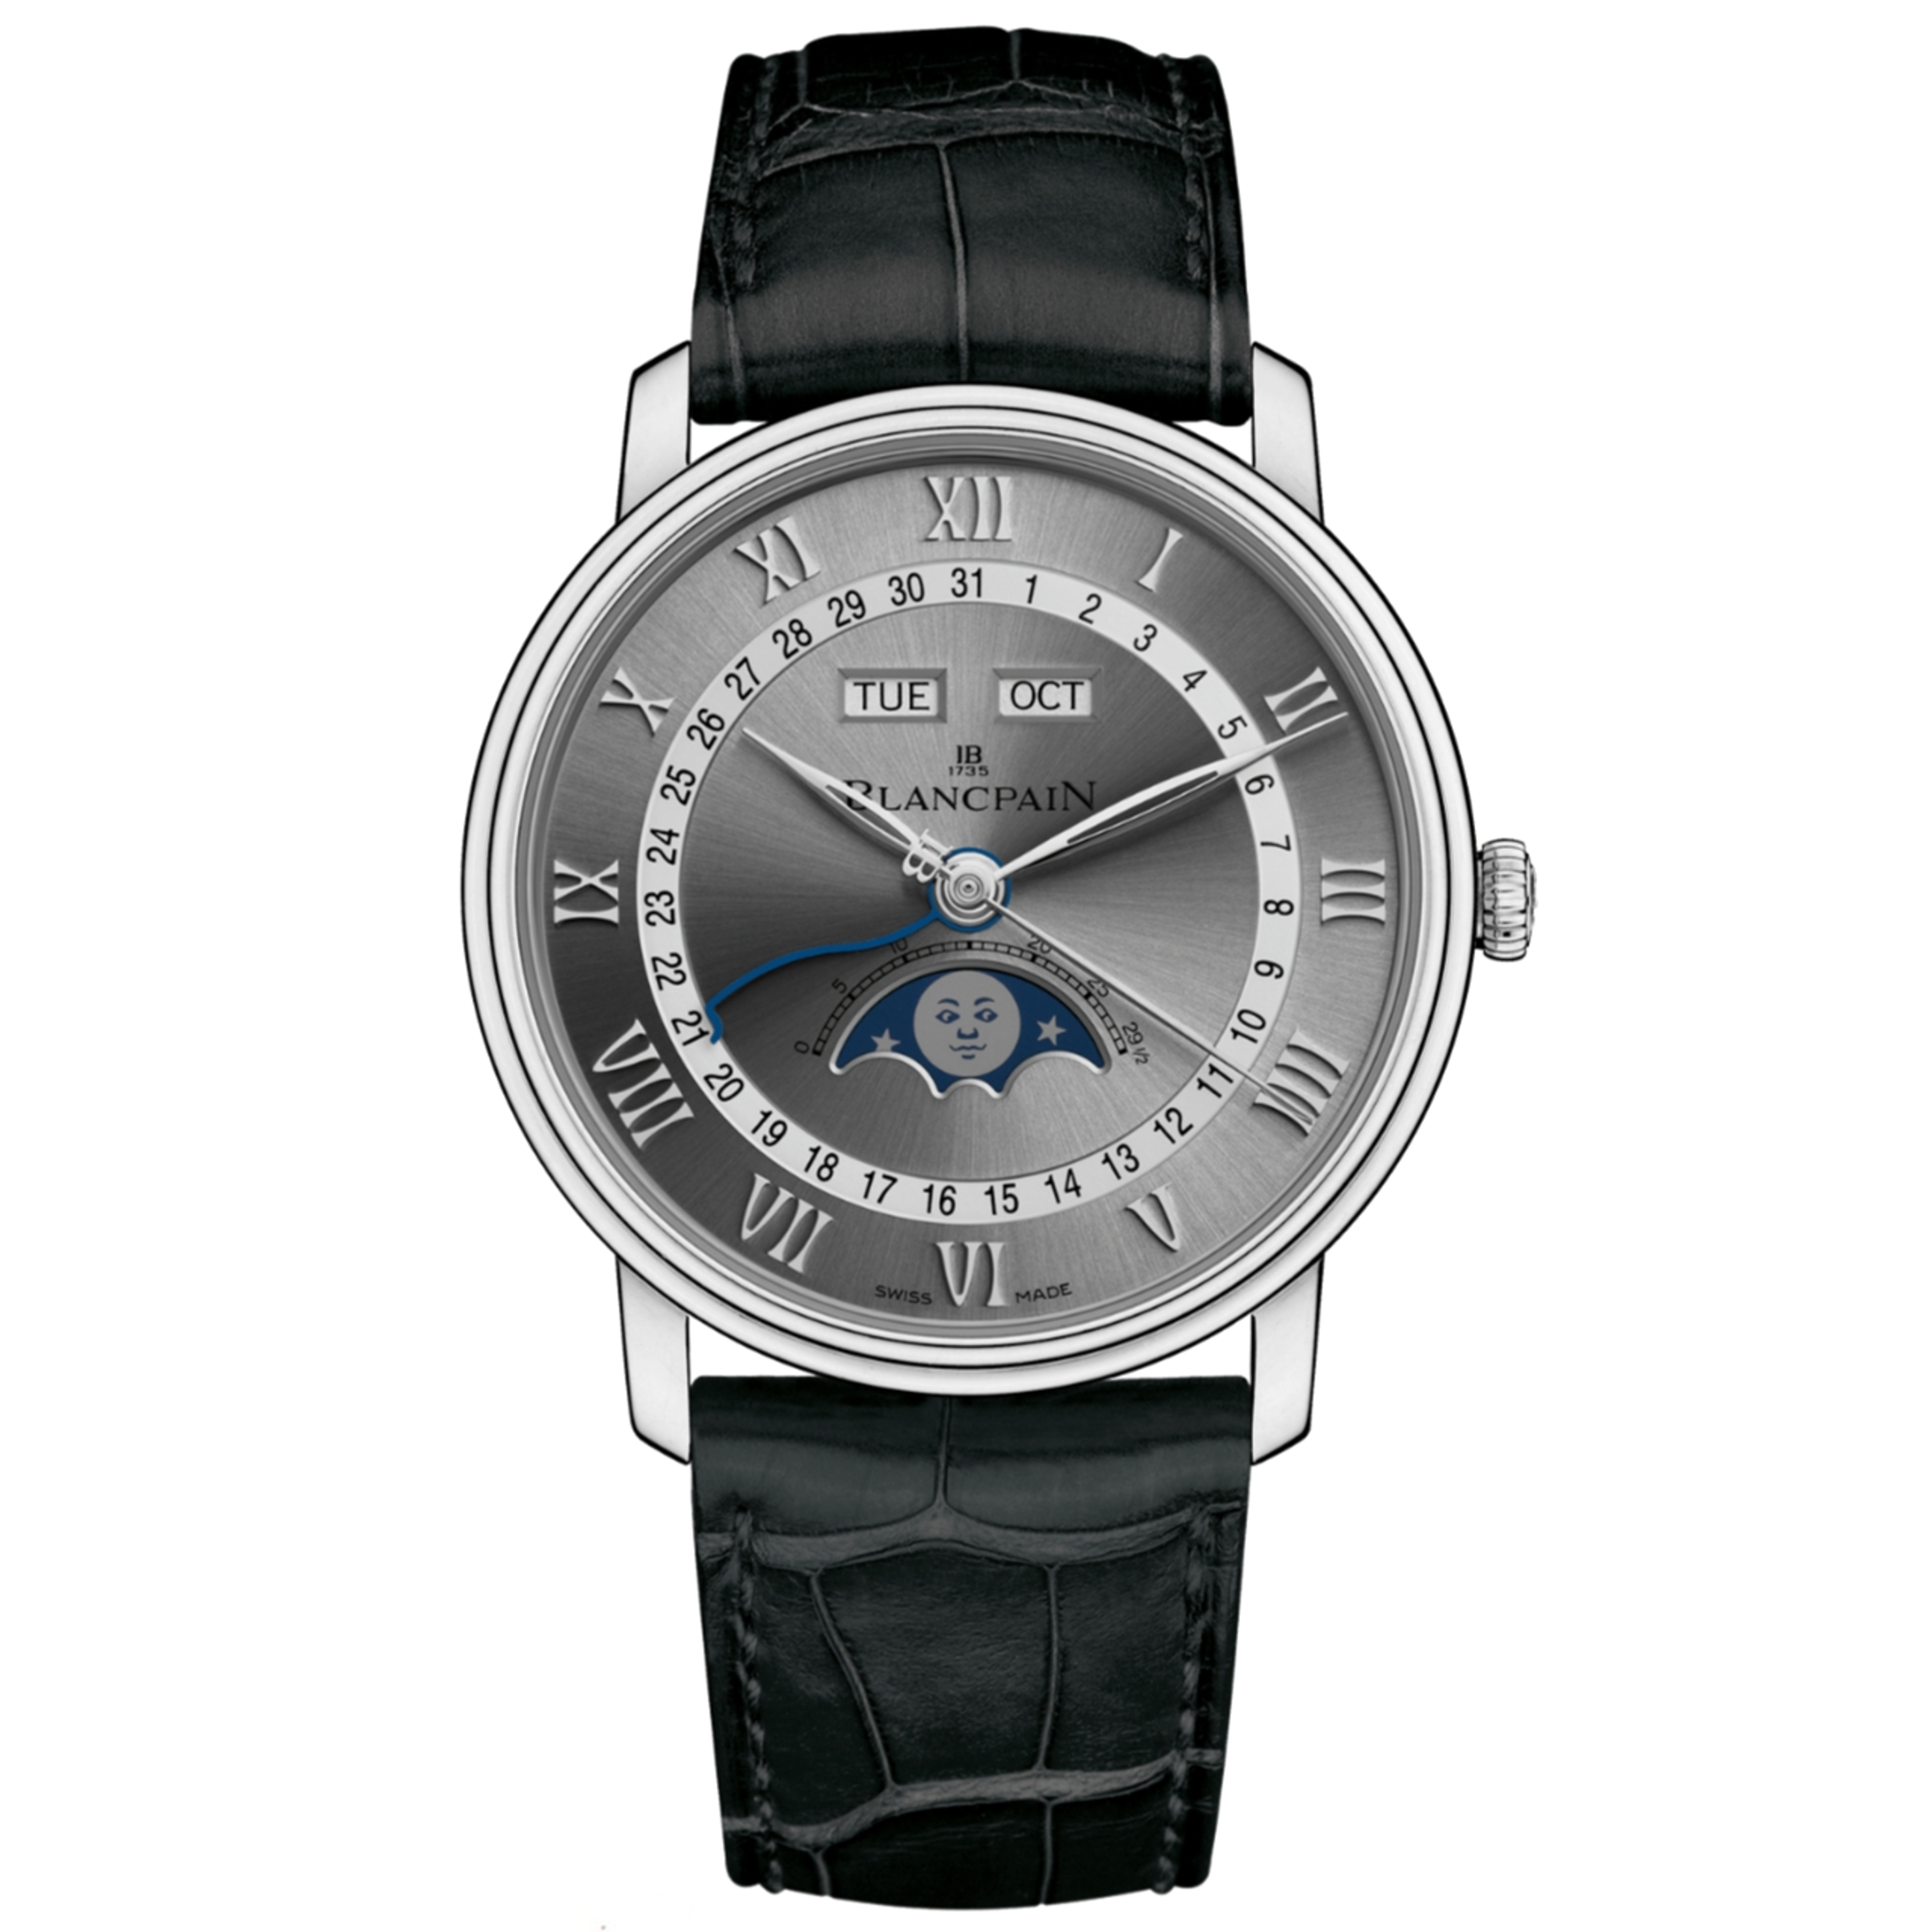 New Blancpain Villeret Complete Calendar Moonphase Silver Dial on Strap